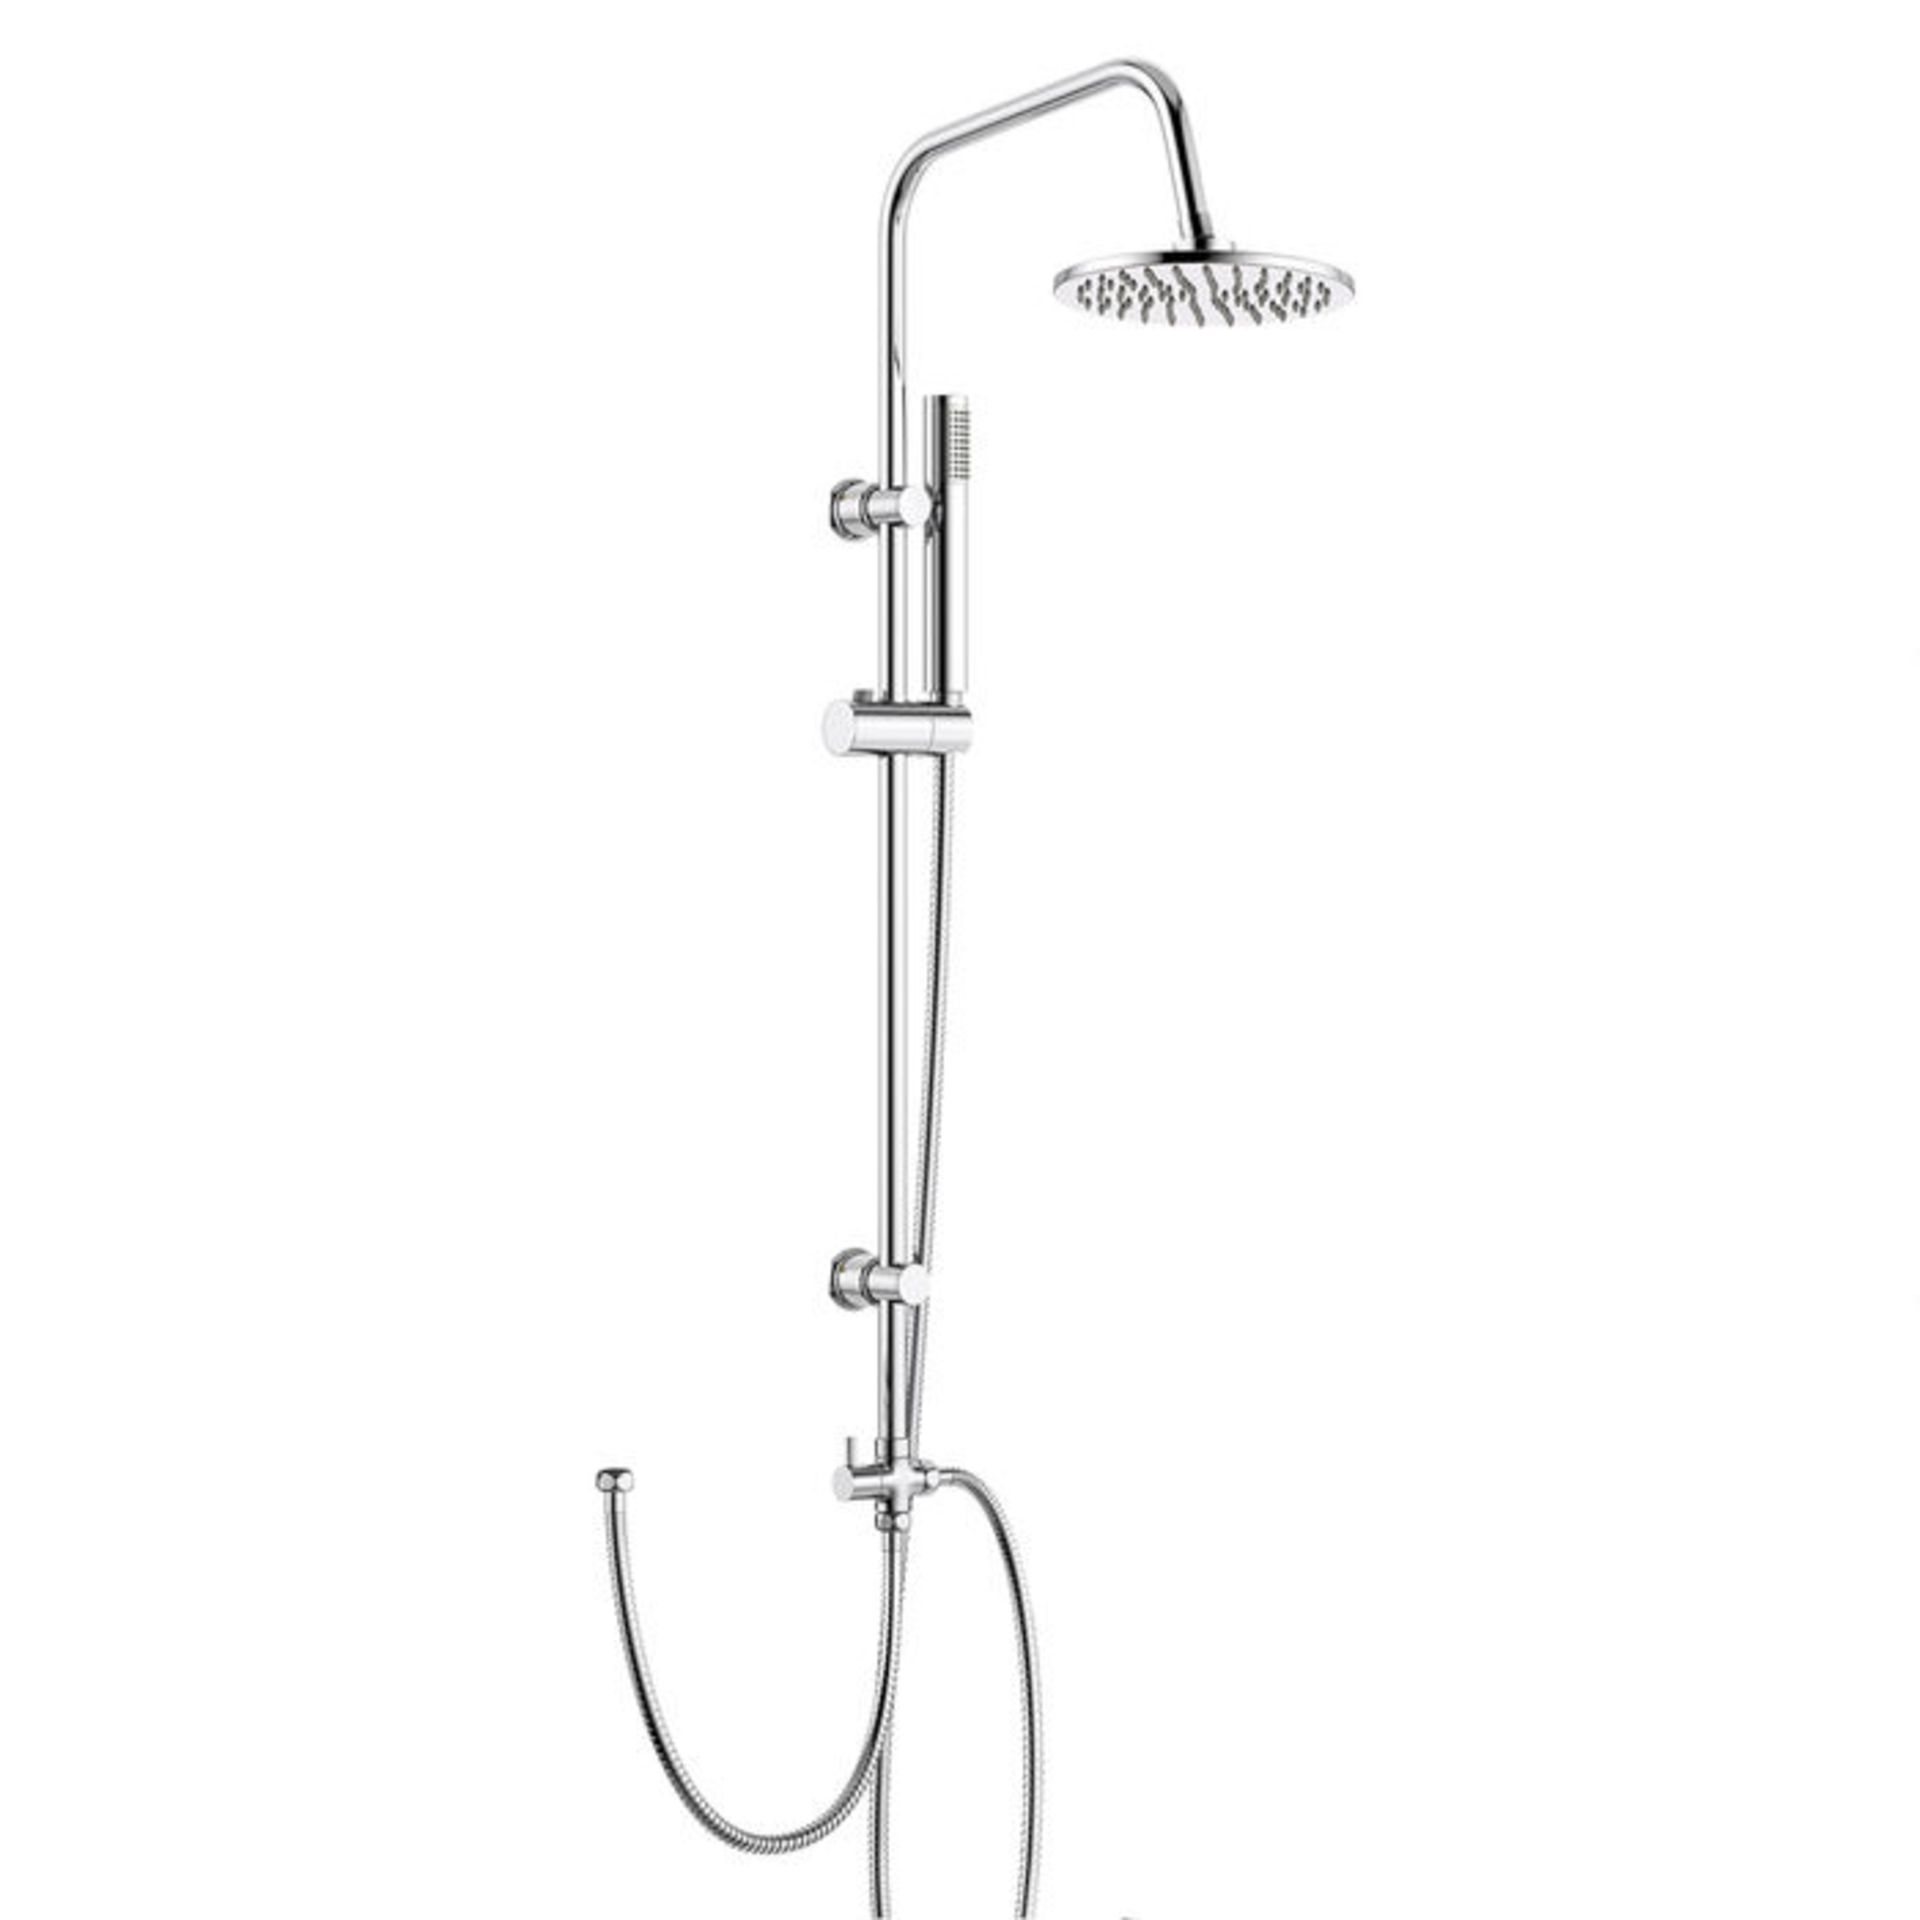 (LU104) 200mm Round Head, Riser Rail & Handheld Kit. Quality stainless steel shower head with Easy - Image 2 of 4